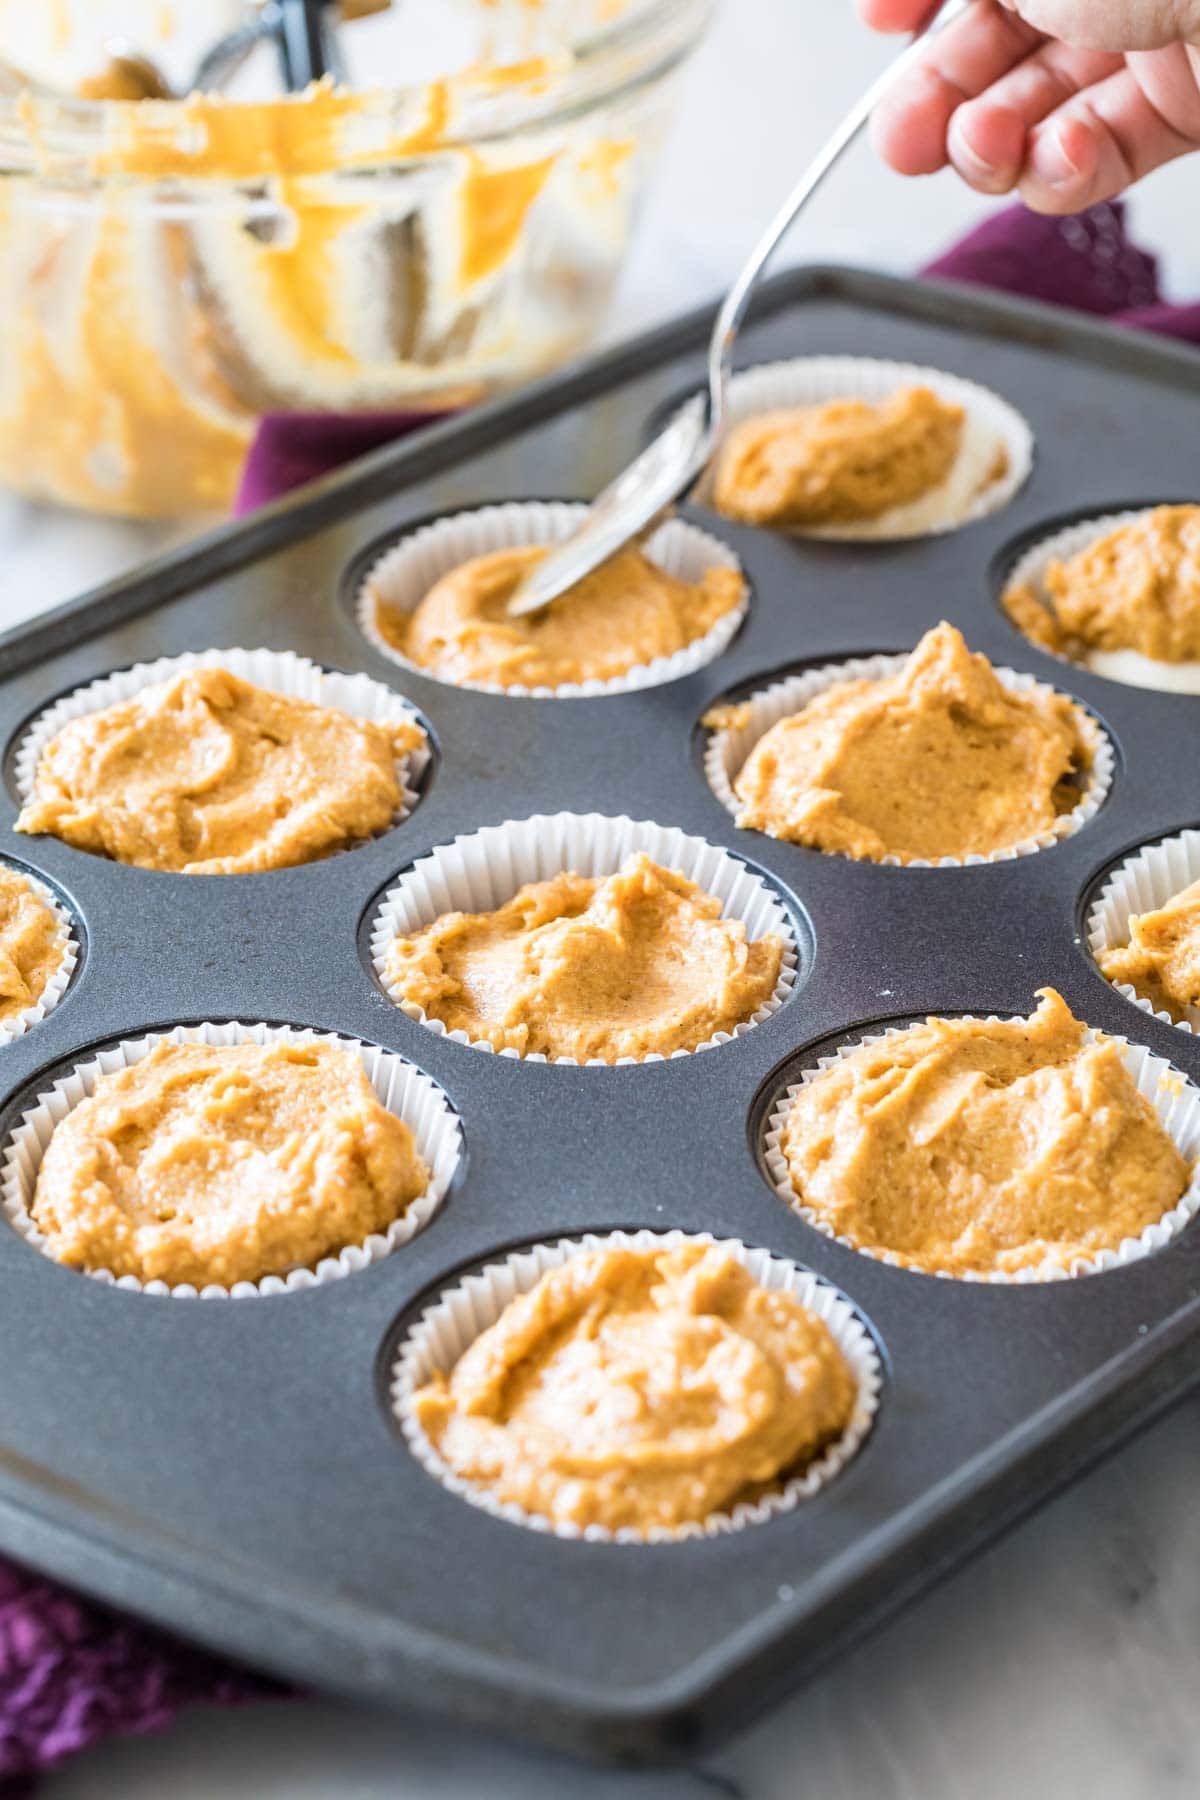 spoon smoothing pumpkin muffin batter into cupcake liners